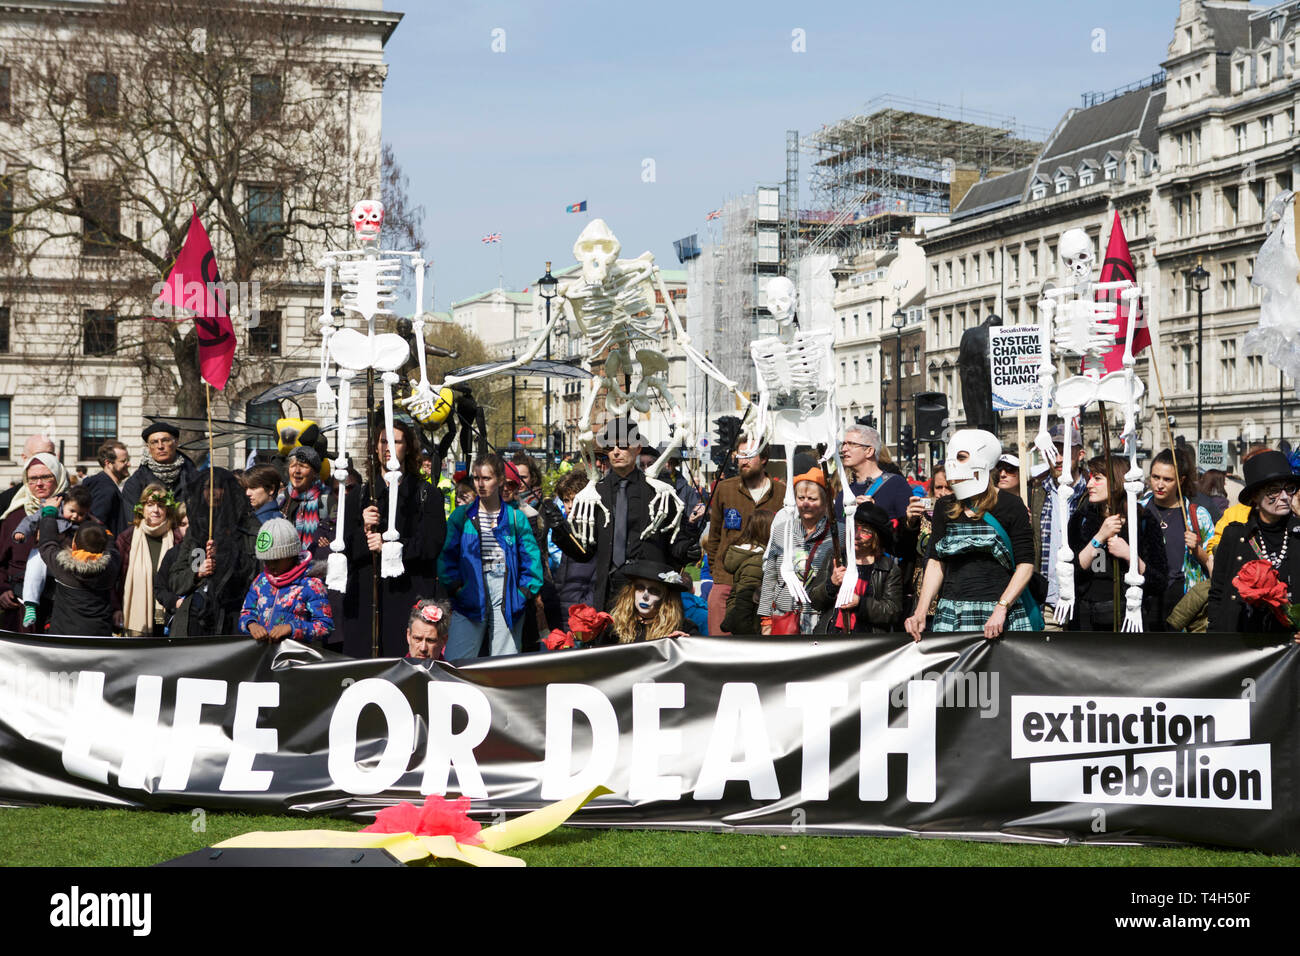 Protesting: Extinction Rebellion London - environmental protest activists - demanding governments take action against climate change. Stock Photo